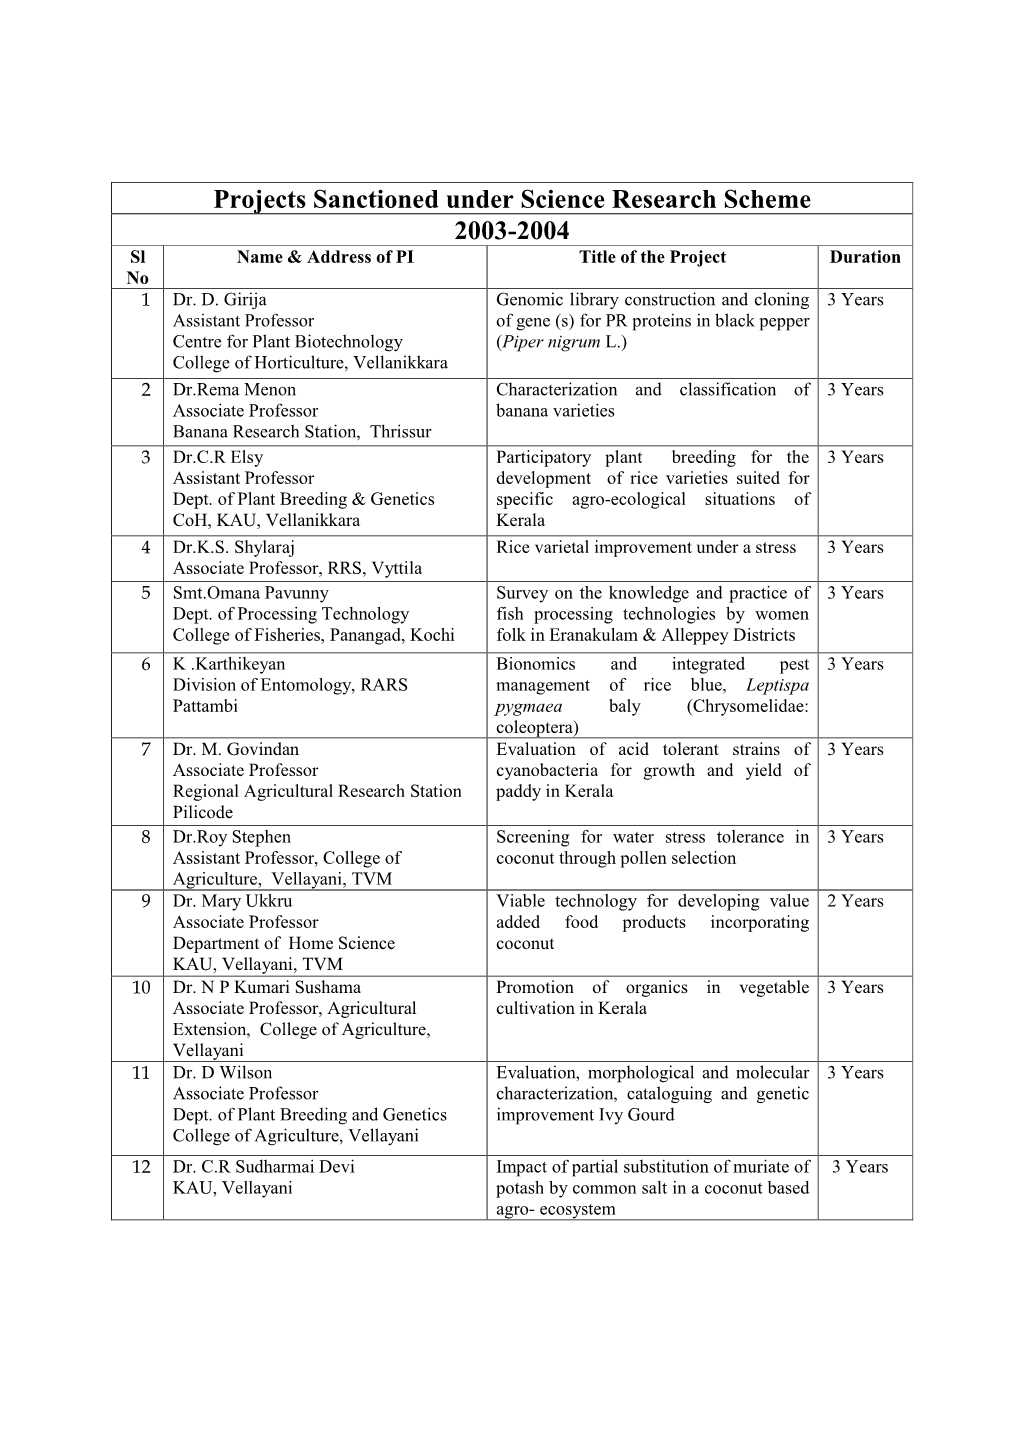 List of Project Sanctioned Under Science Research Scheme